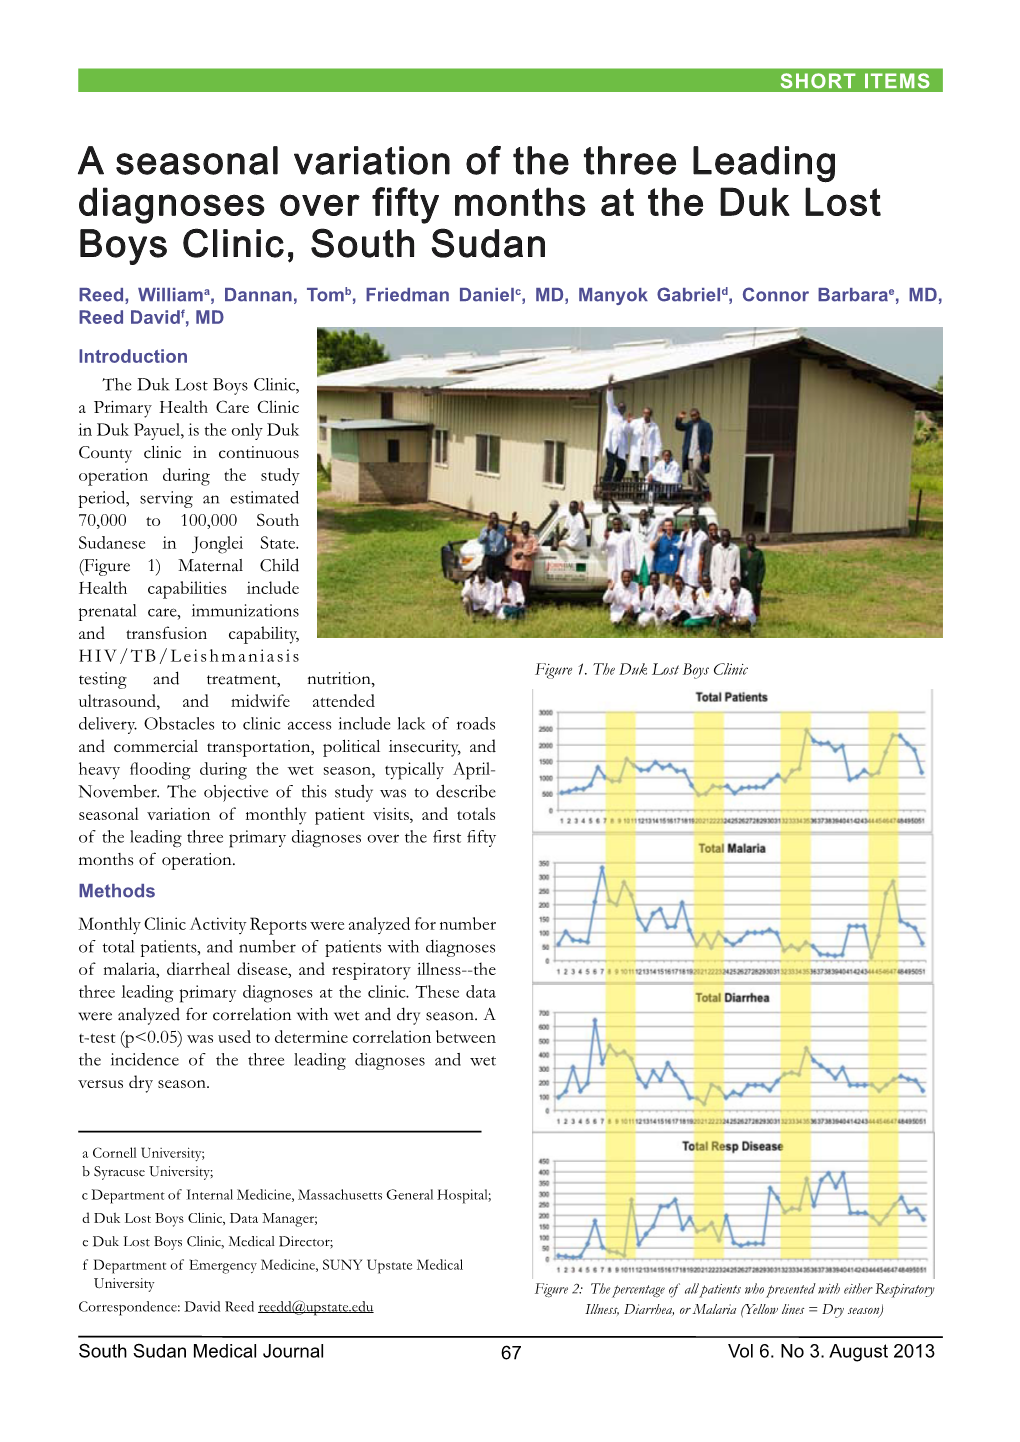 A Seasonal Variation of the Three Leading Diagnoses Over Fifty Months at the Duk Lost Boys Clinic, South Sudan